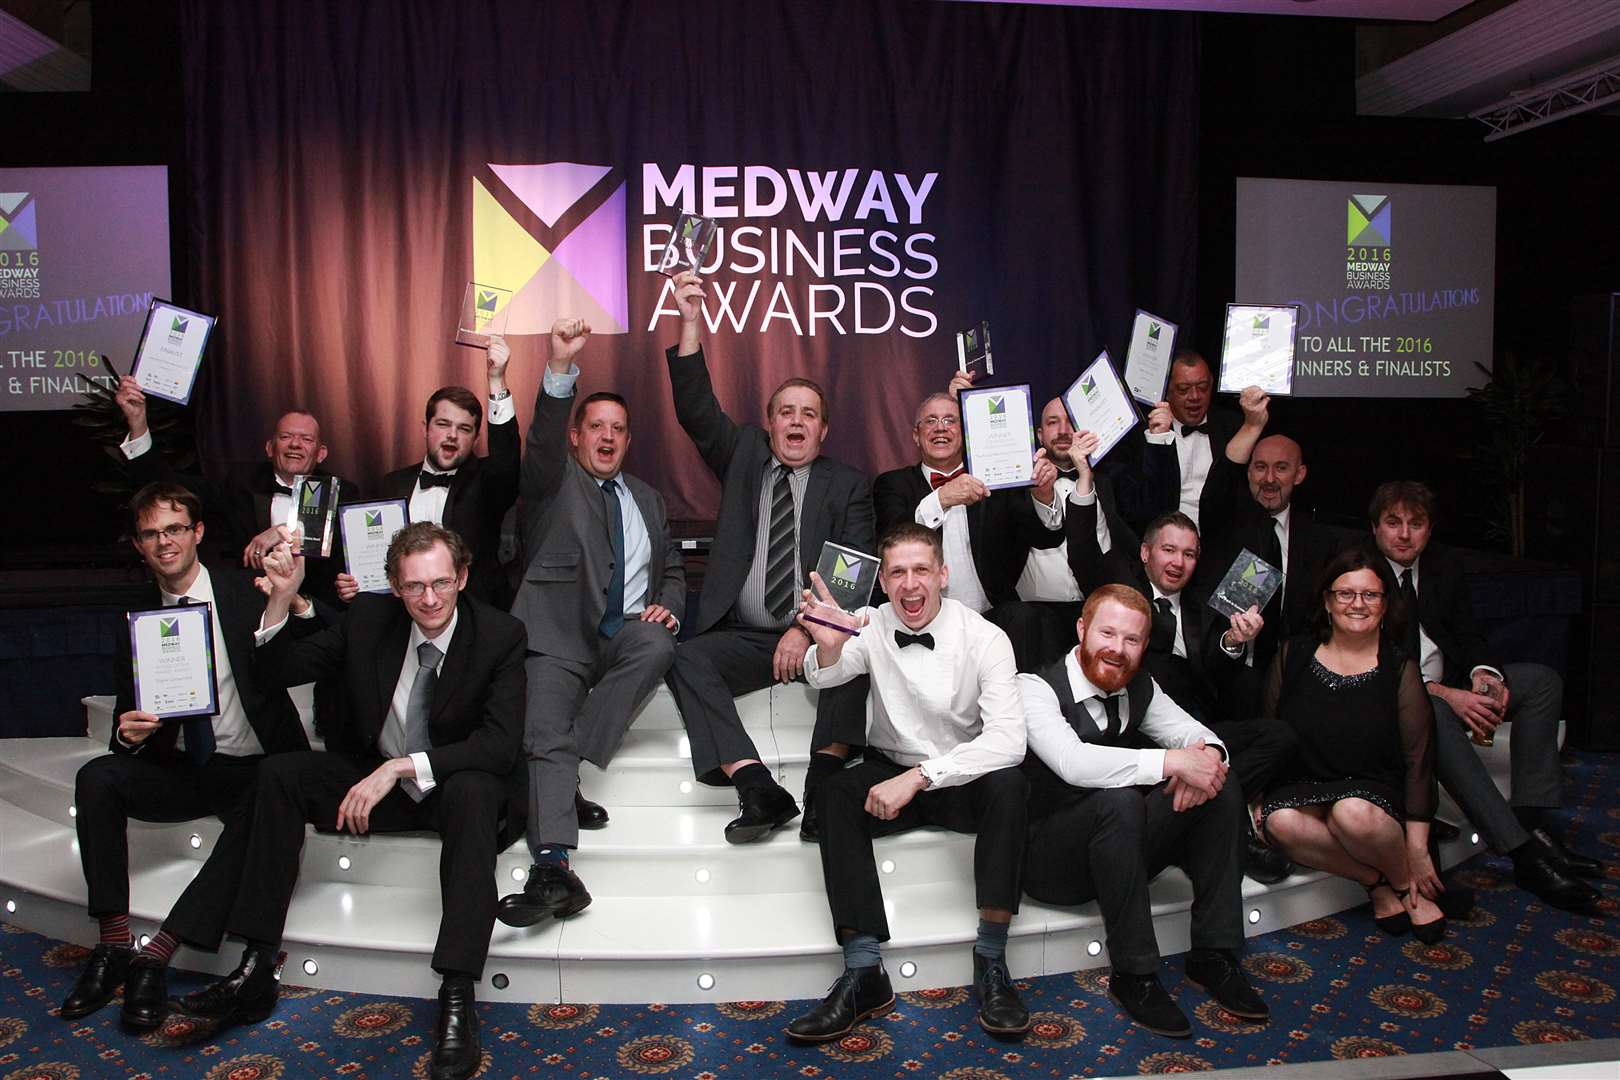 The winners and finalists at the Medway Business Awards. Picture: Roger Vaughan